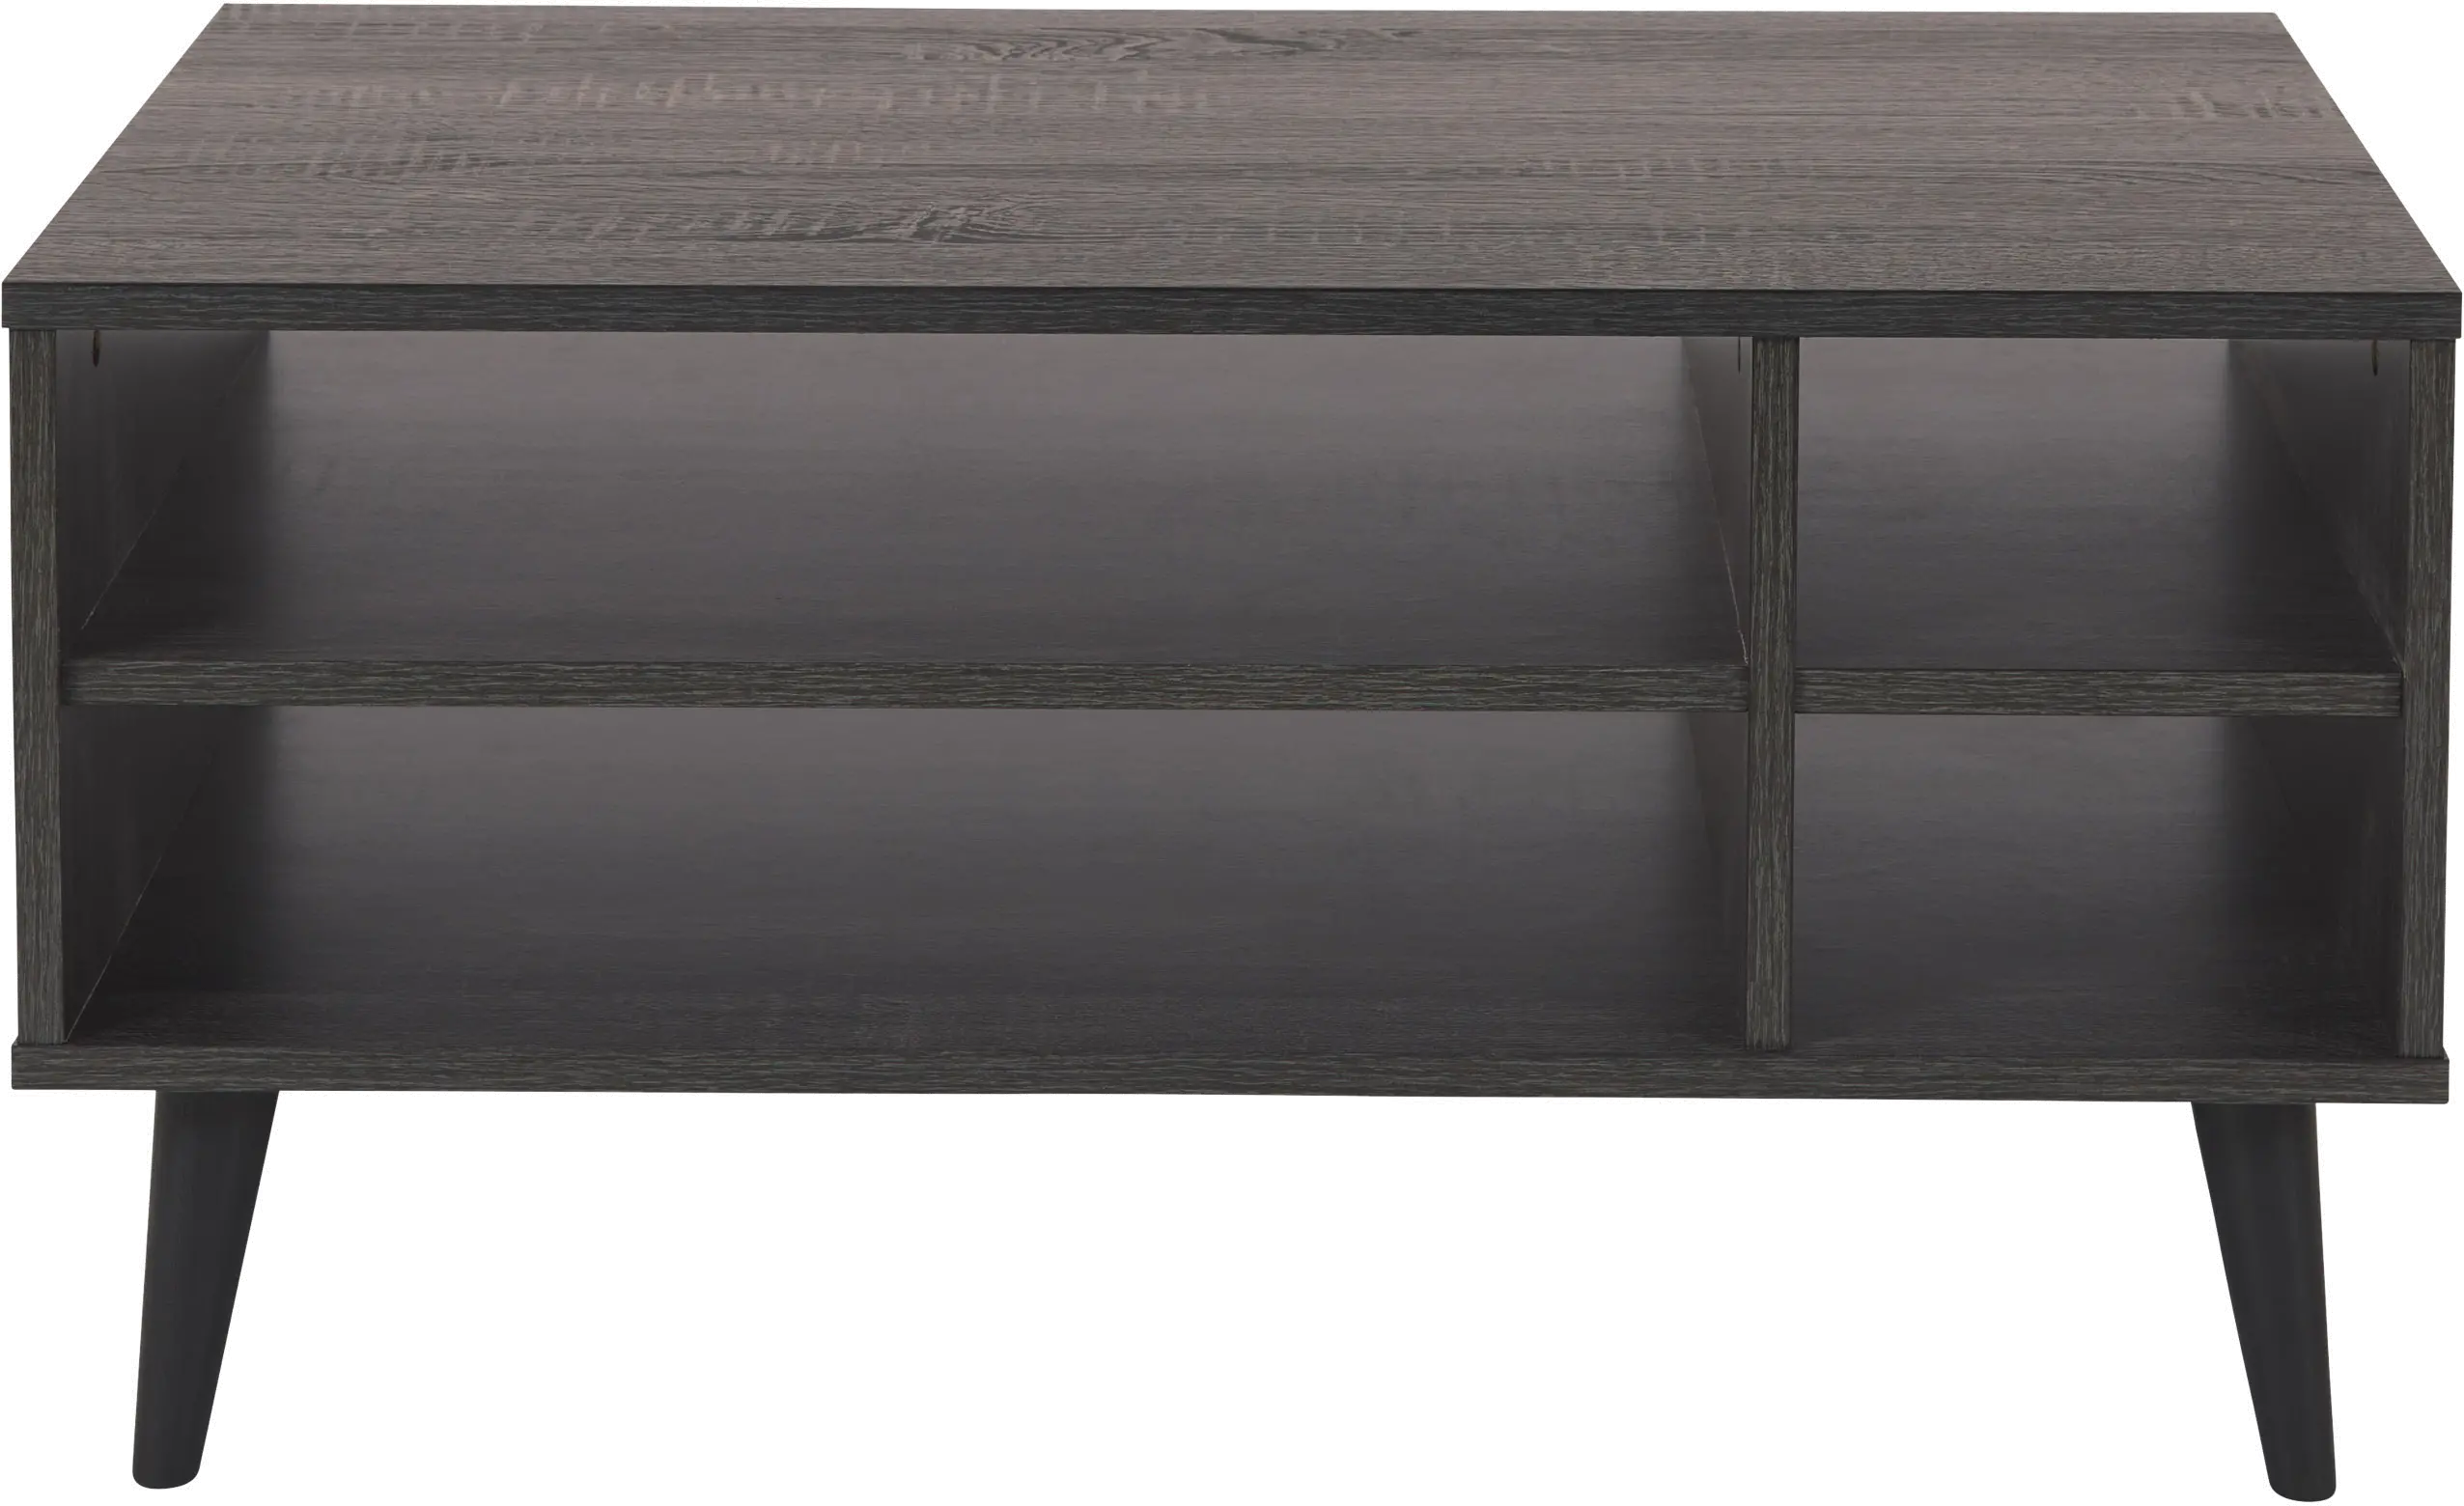 Cole Dark Gray Coffee Table with Storage